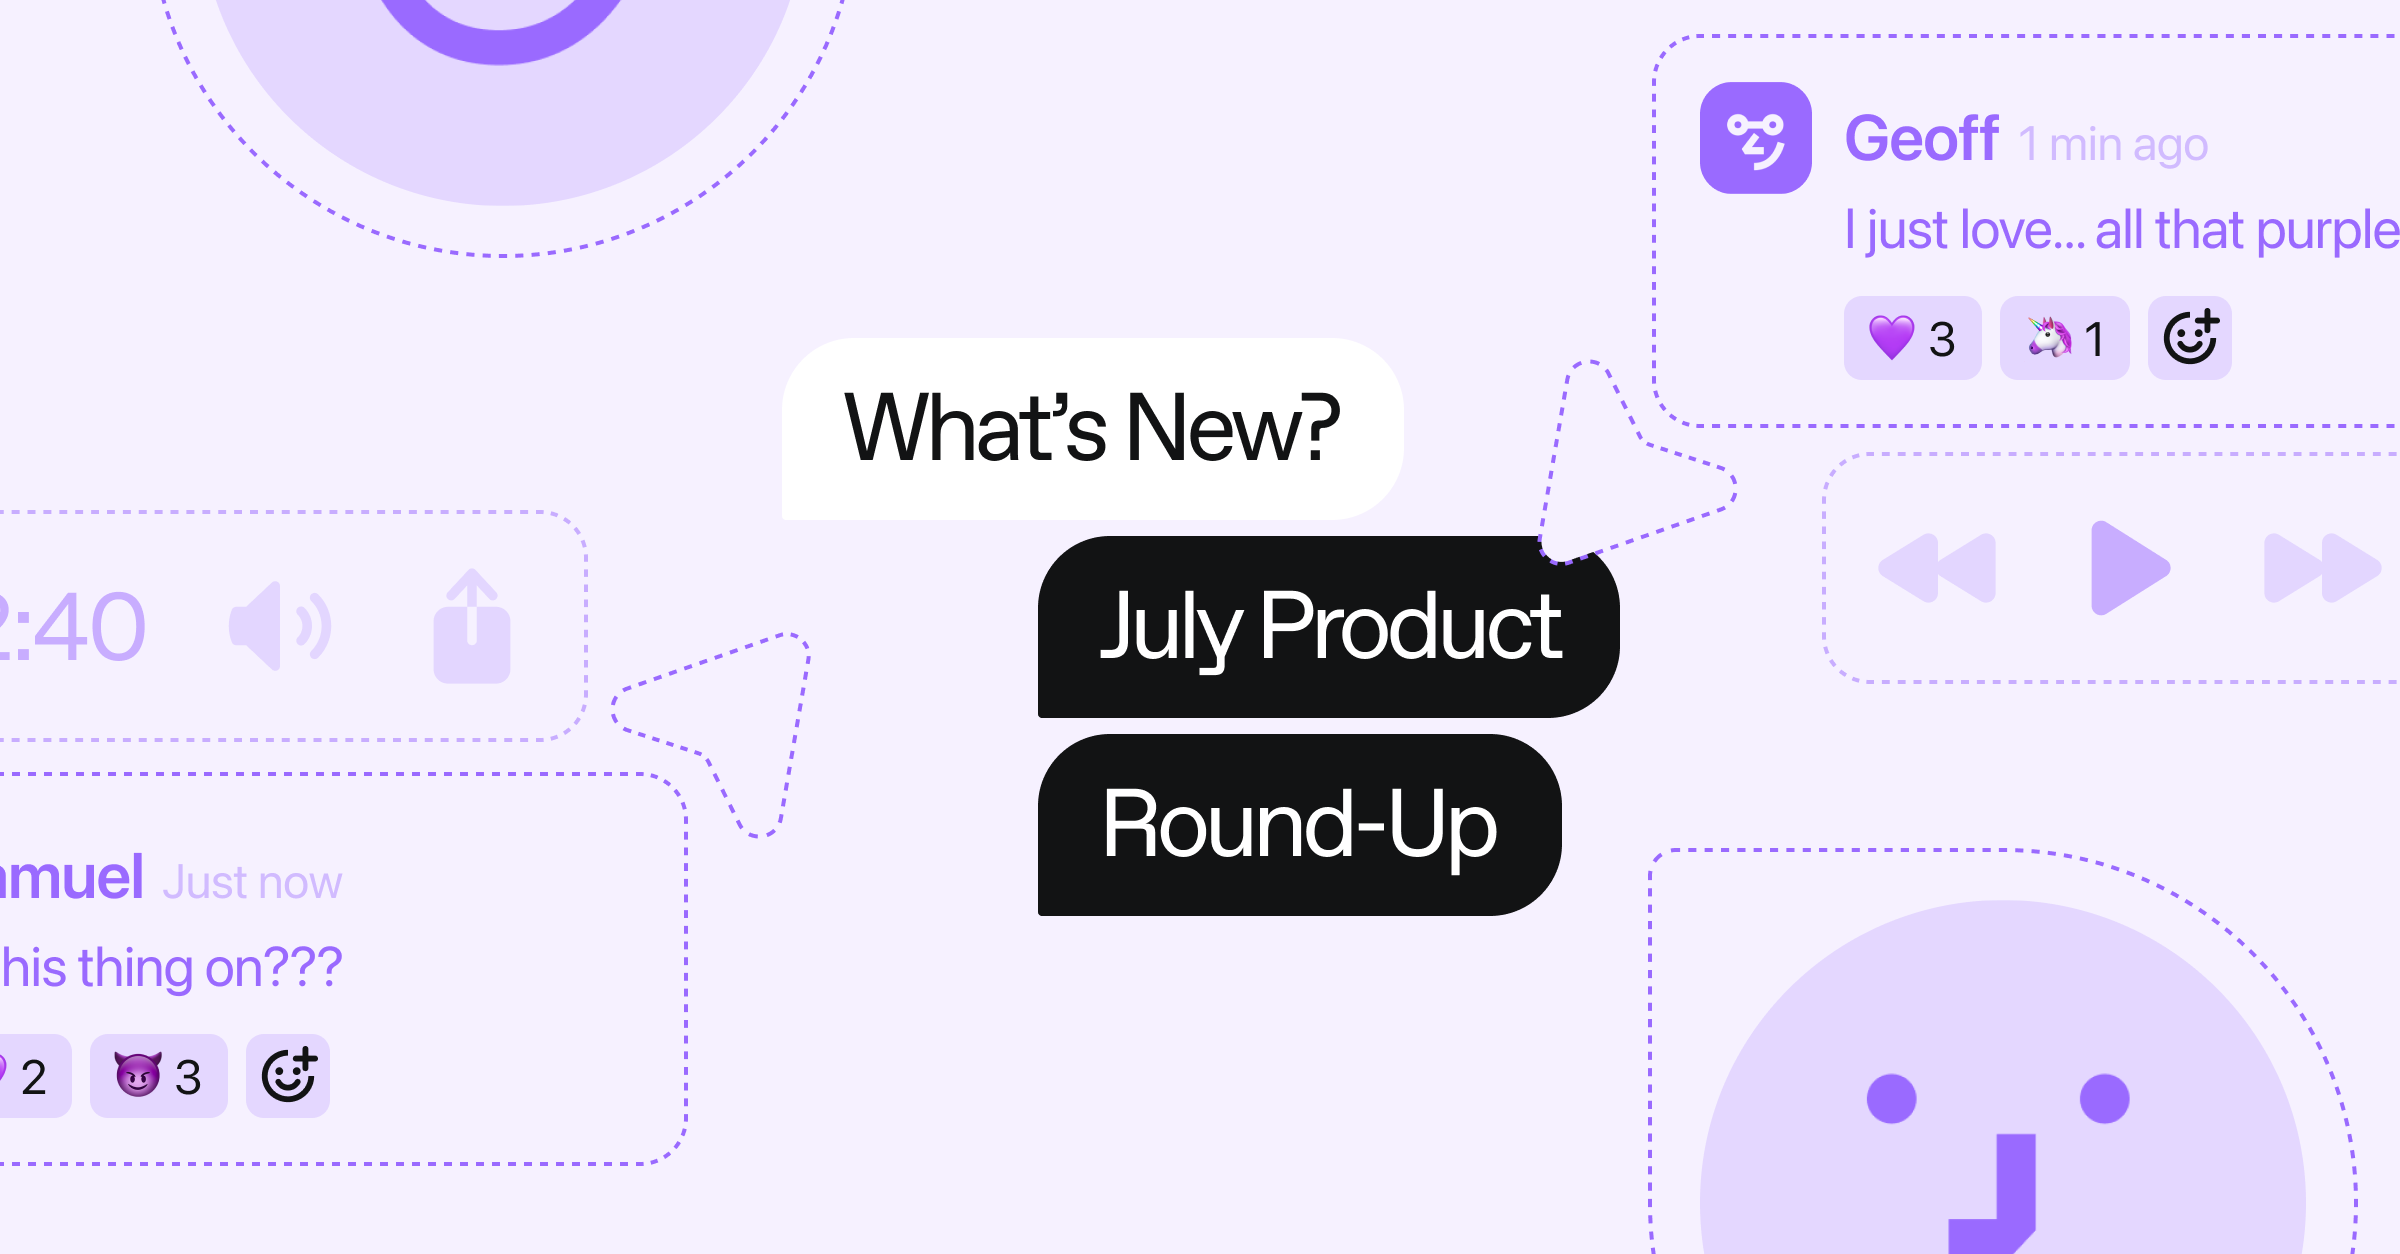 A graphic showing chat messages with reactions and the text "What's New? July Product Round-Up"